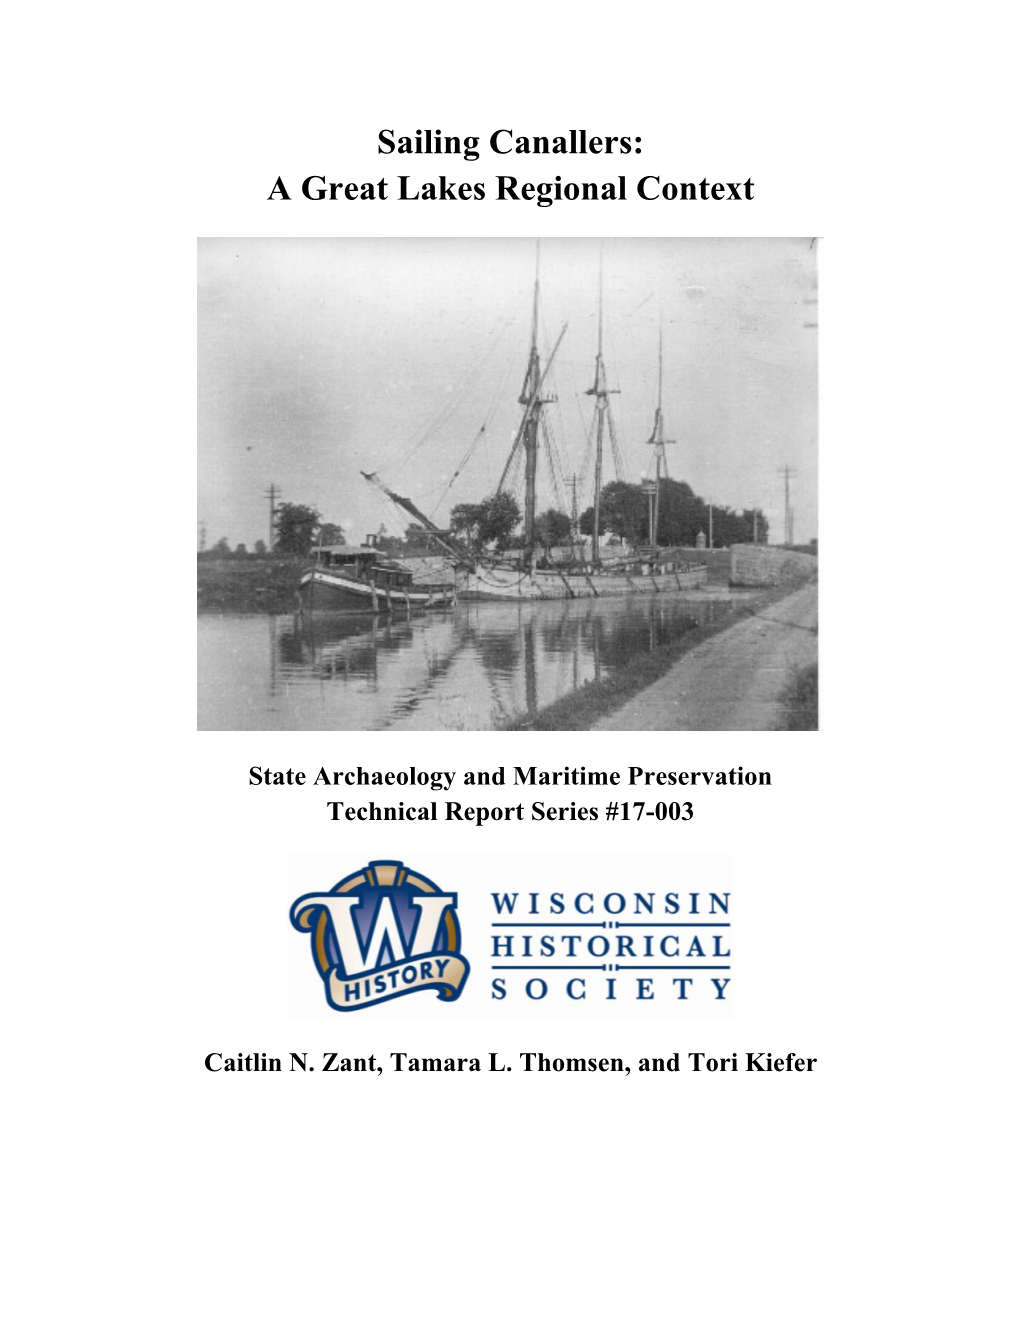 Sailing Canallers: a Great Lakes Regional Context